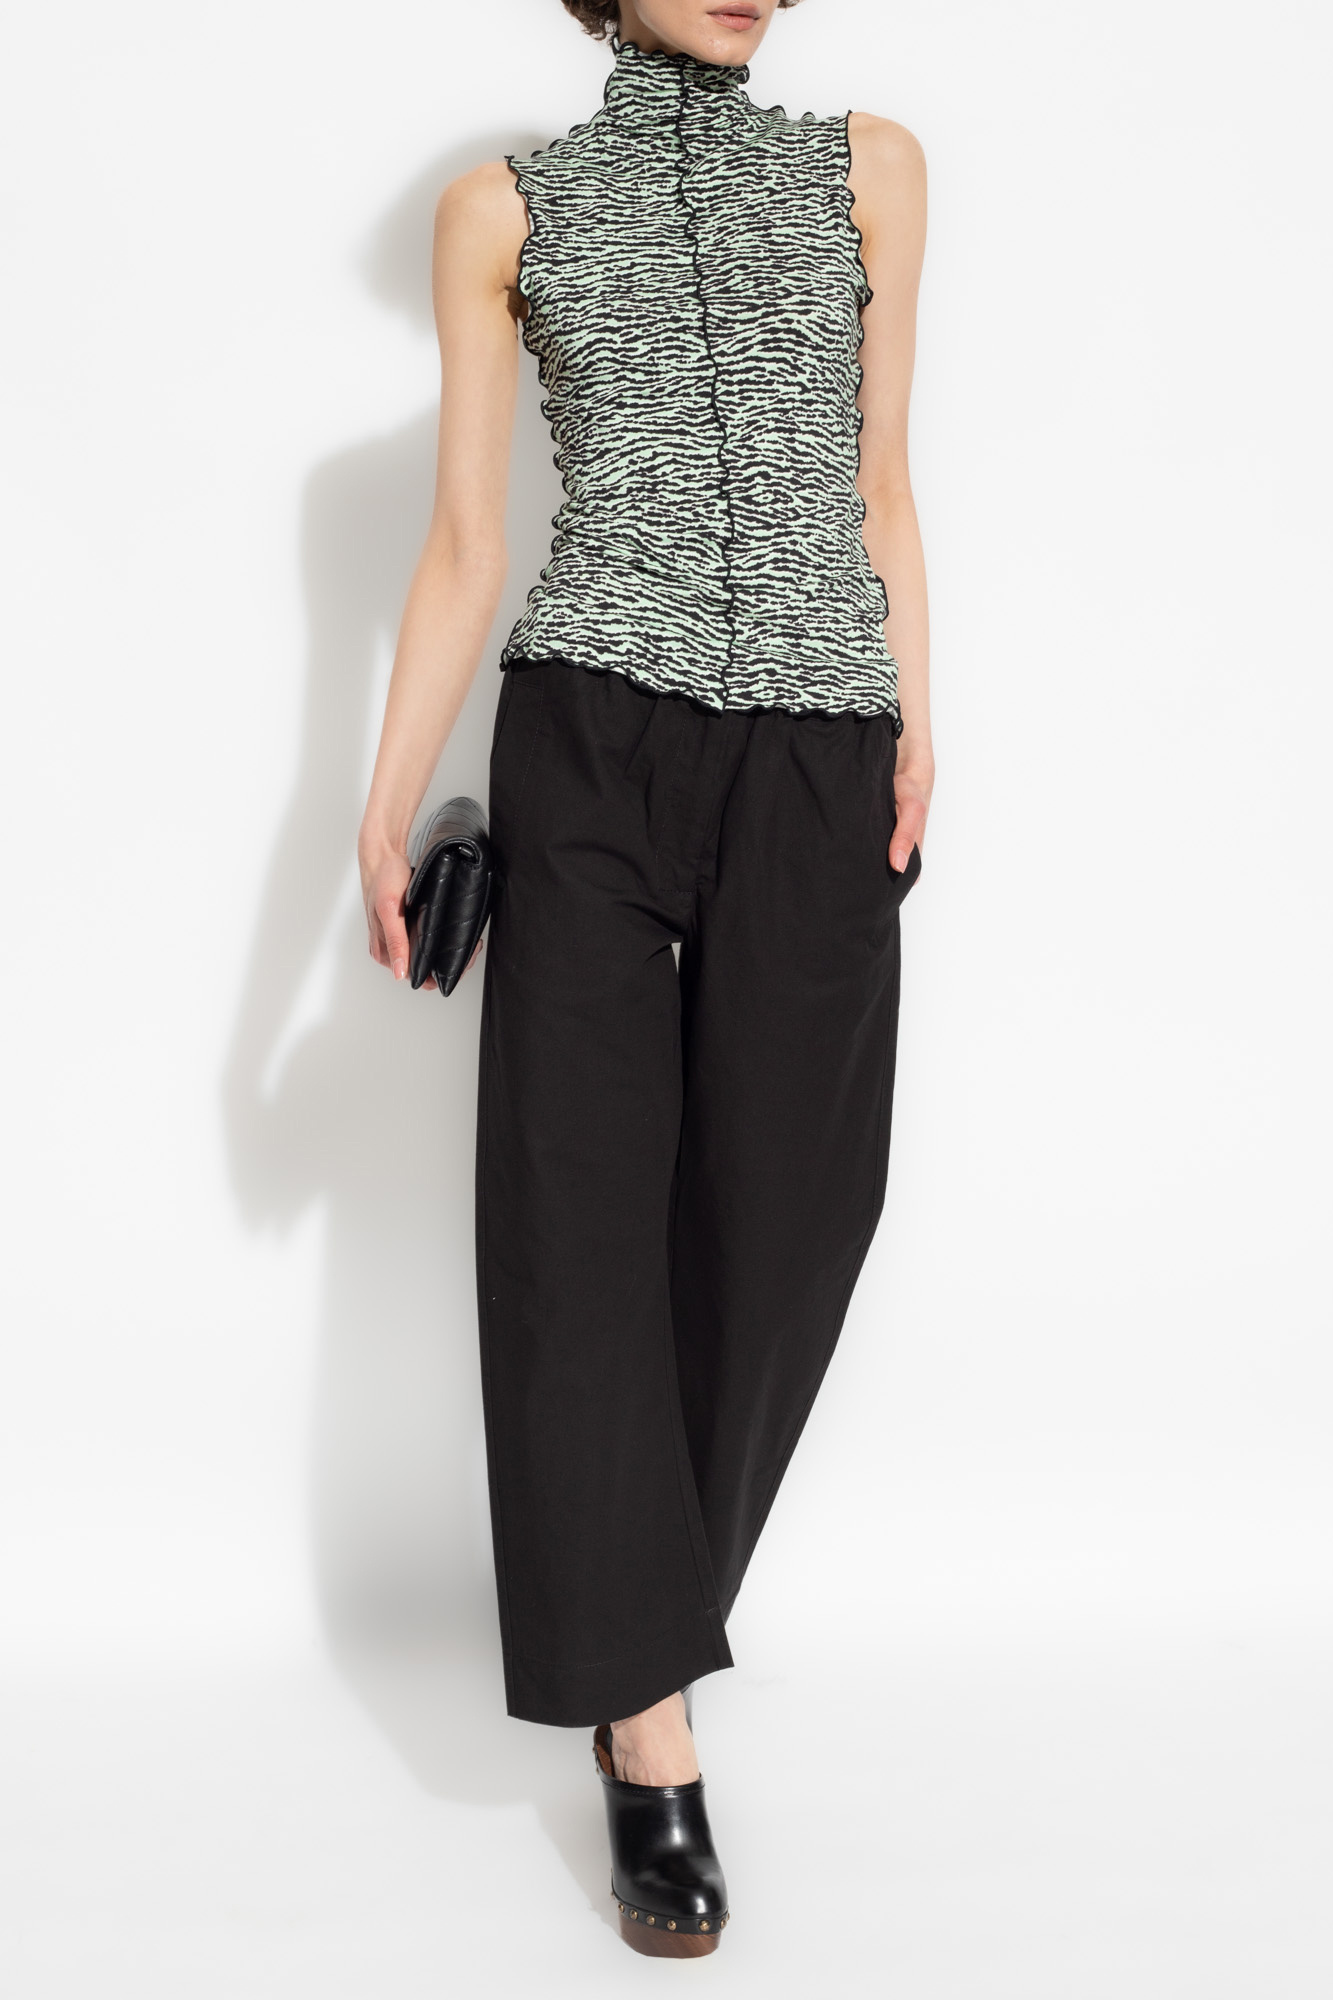 Proenza Schouler cut-out puff-sleeve top Top with animal motif